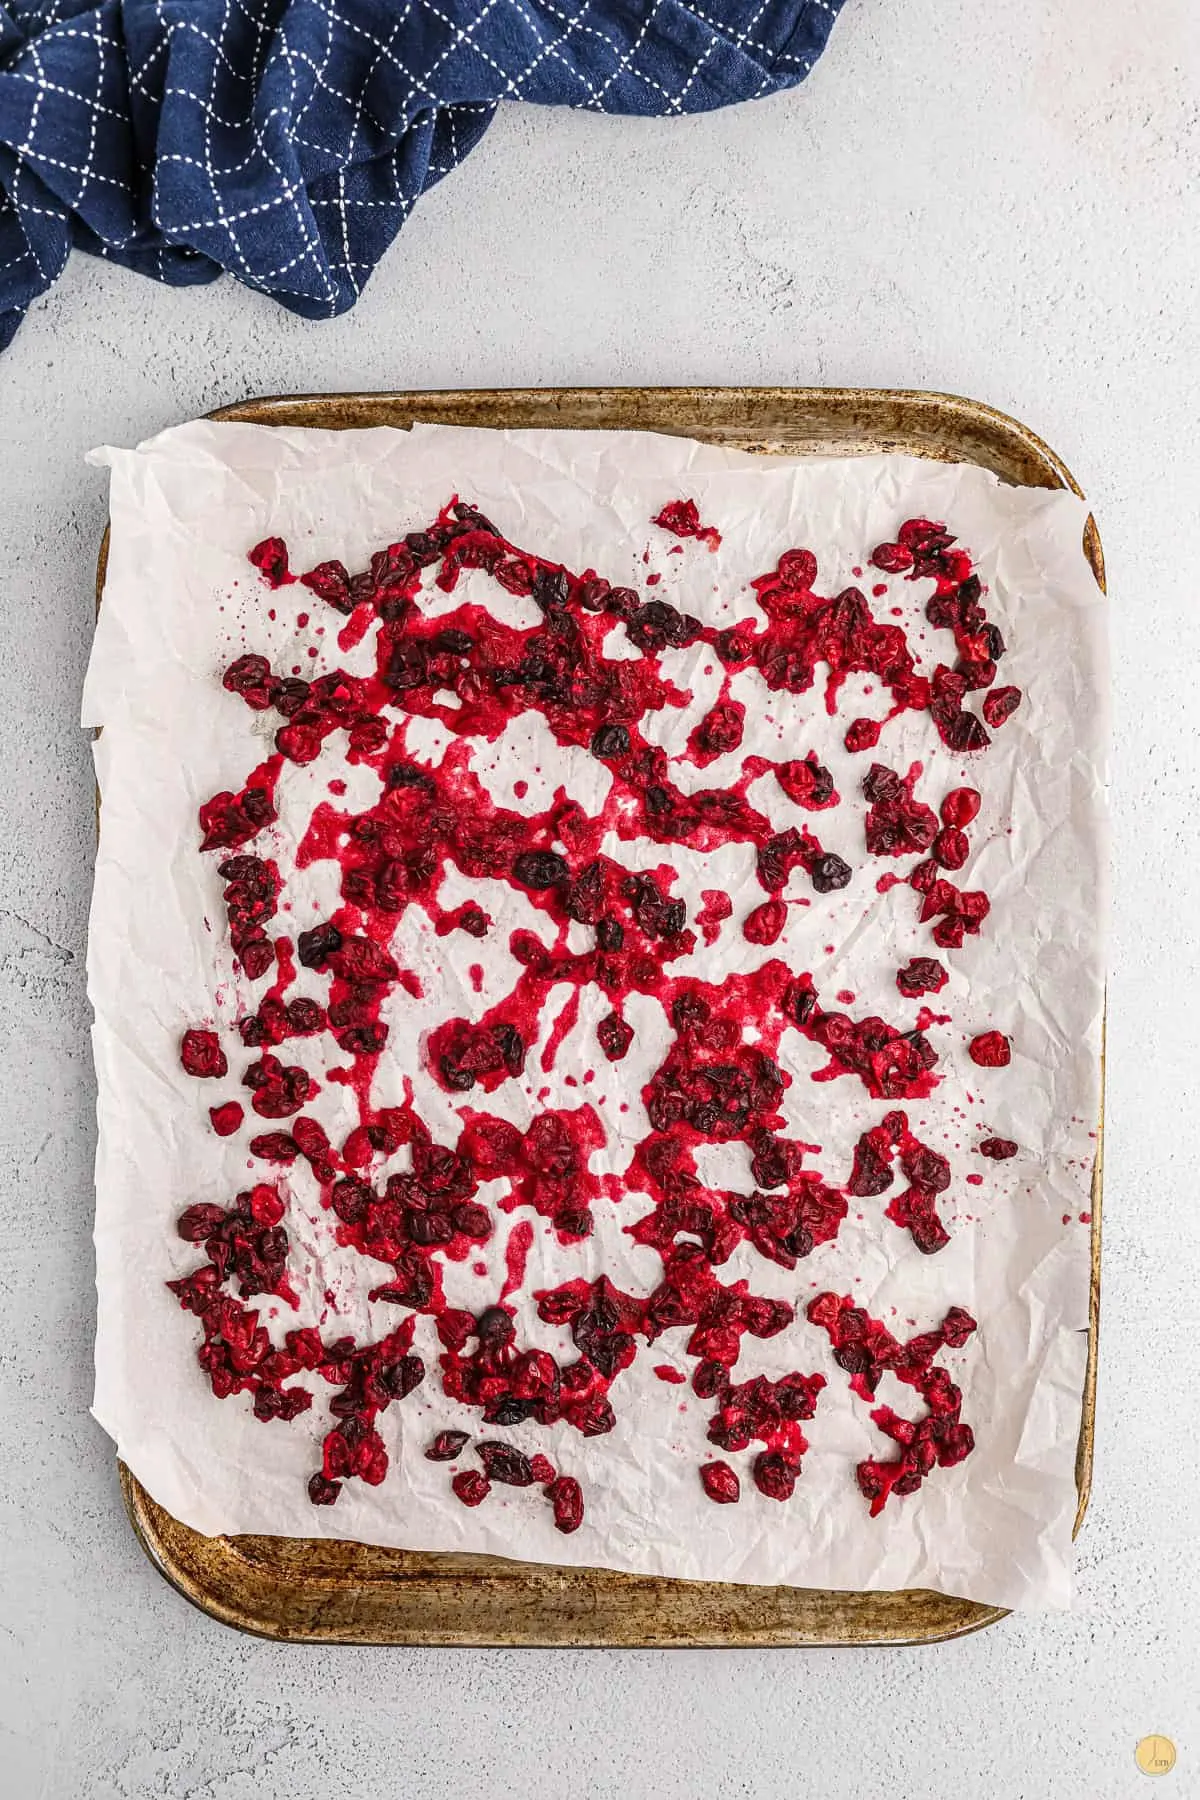 dried cranberries on a baking sheet